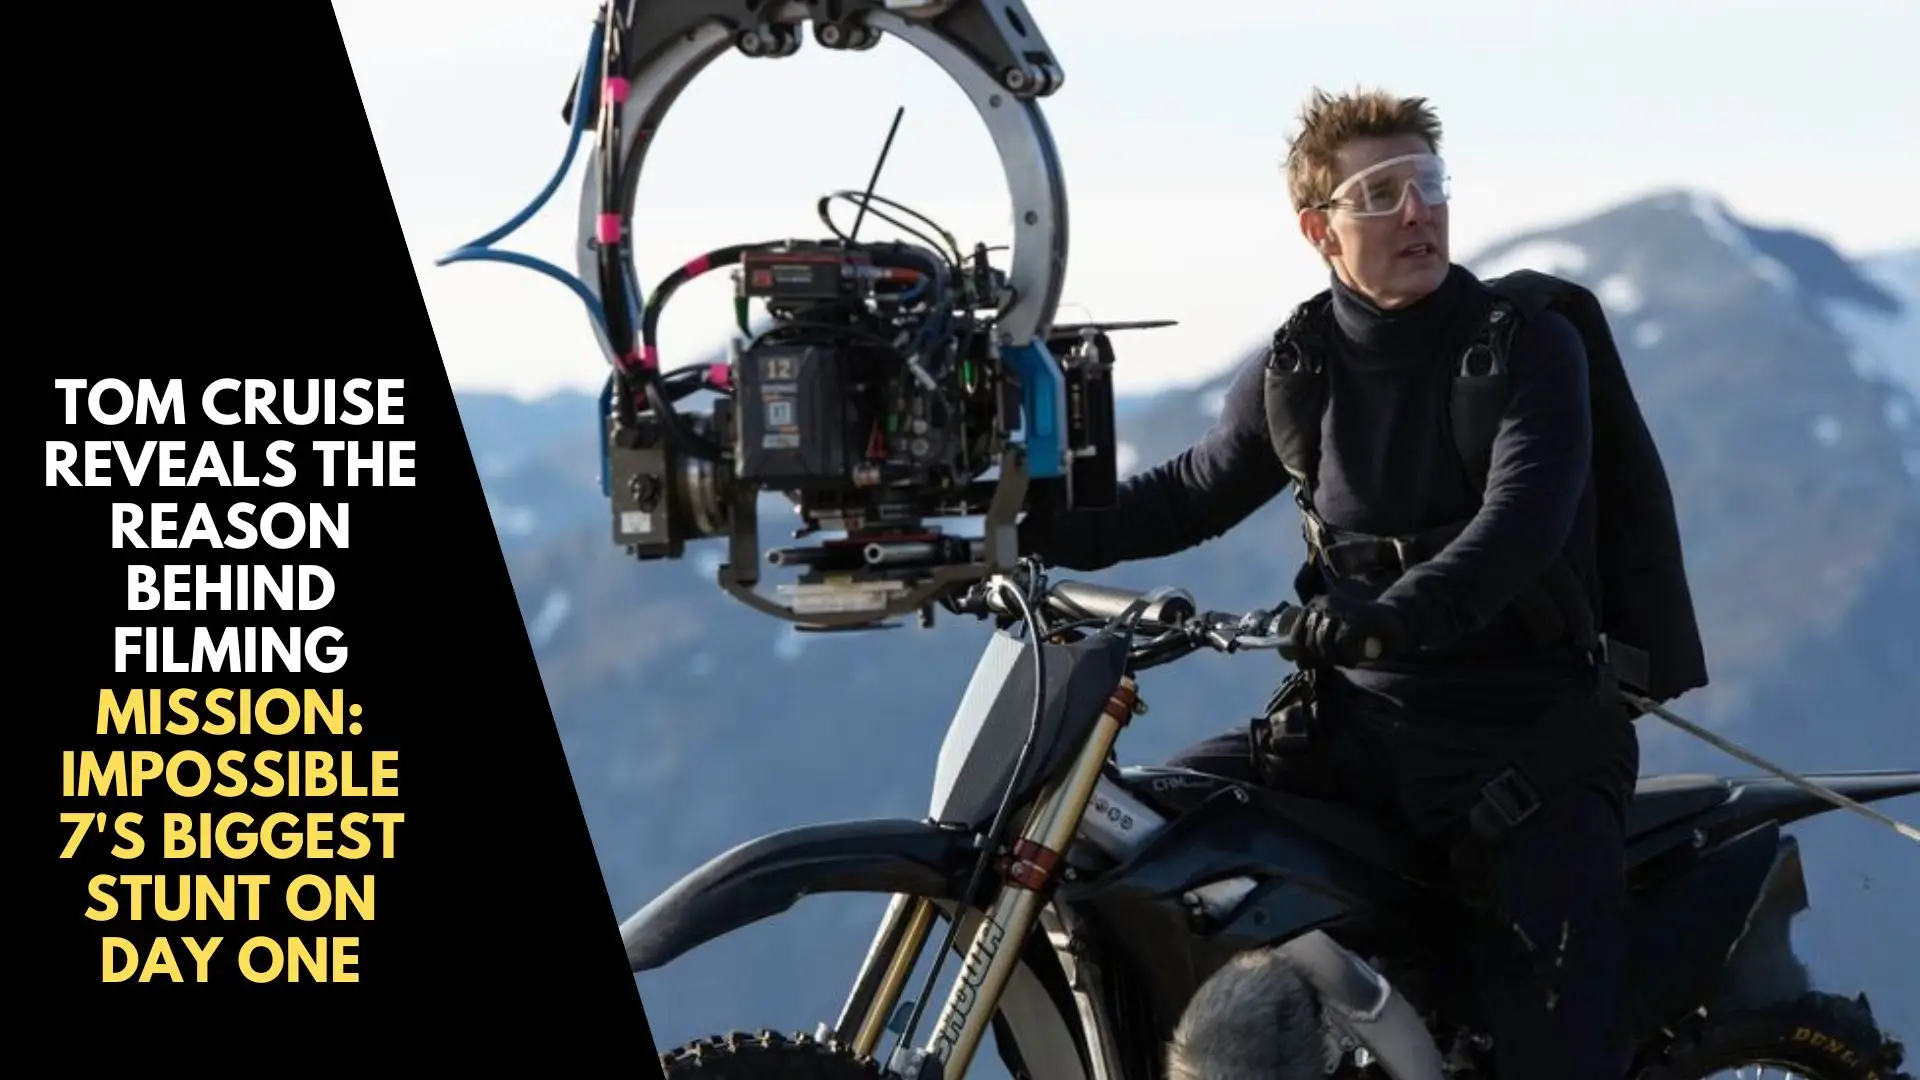 Tom Cruise Reveals the Reason Behind Filming Mission_ Impossible 7's Biggest Stunt on Day One